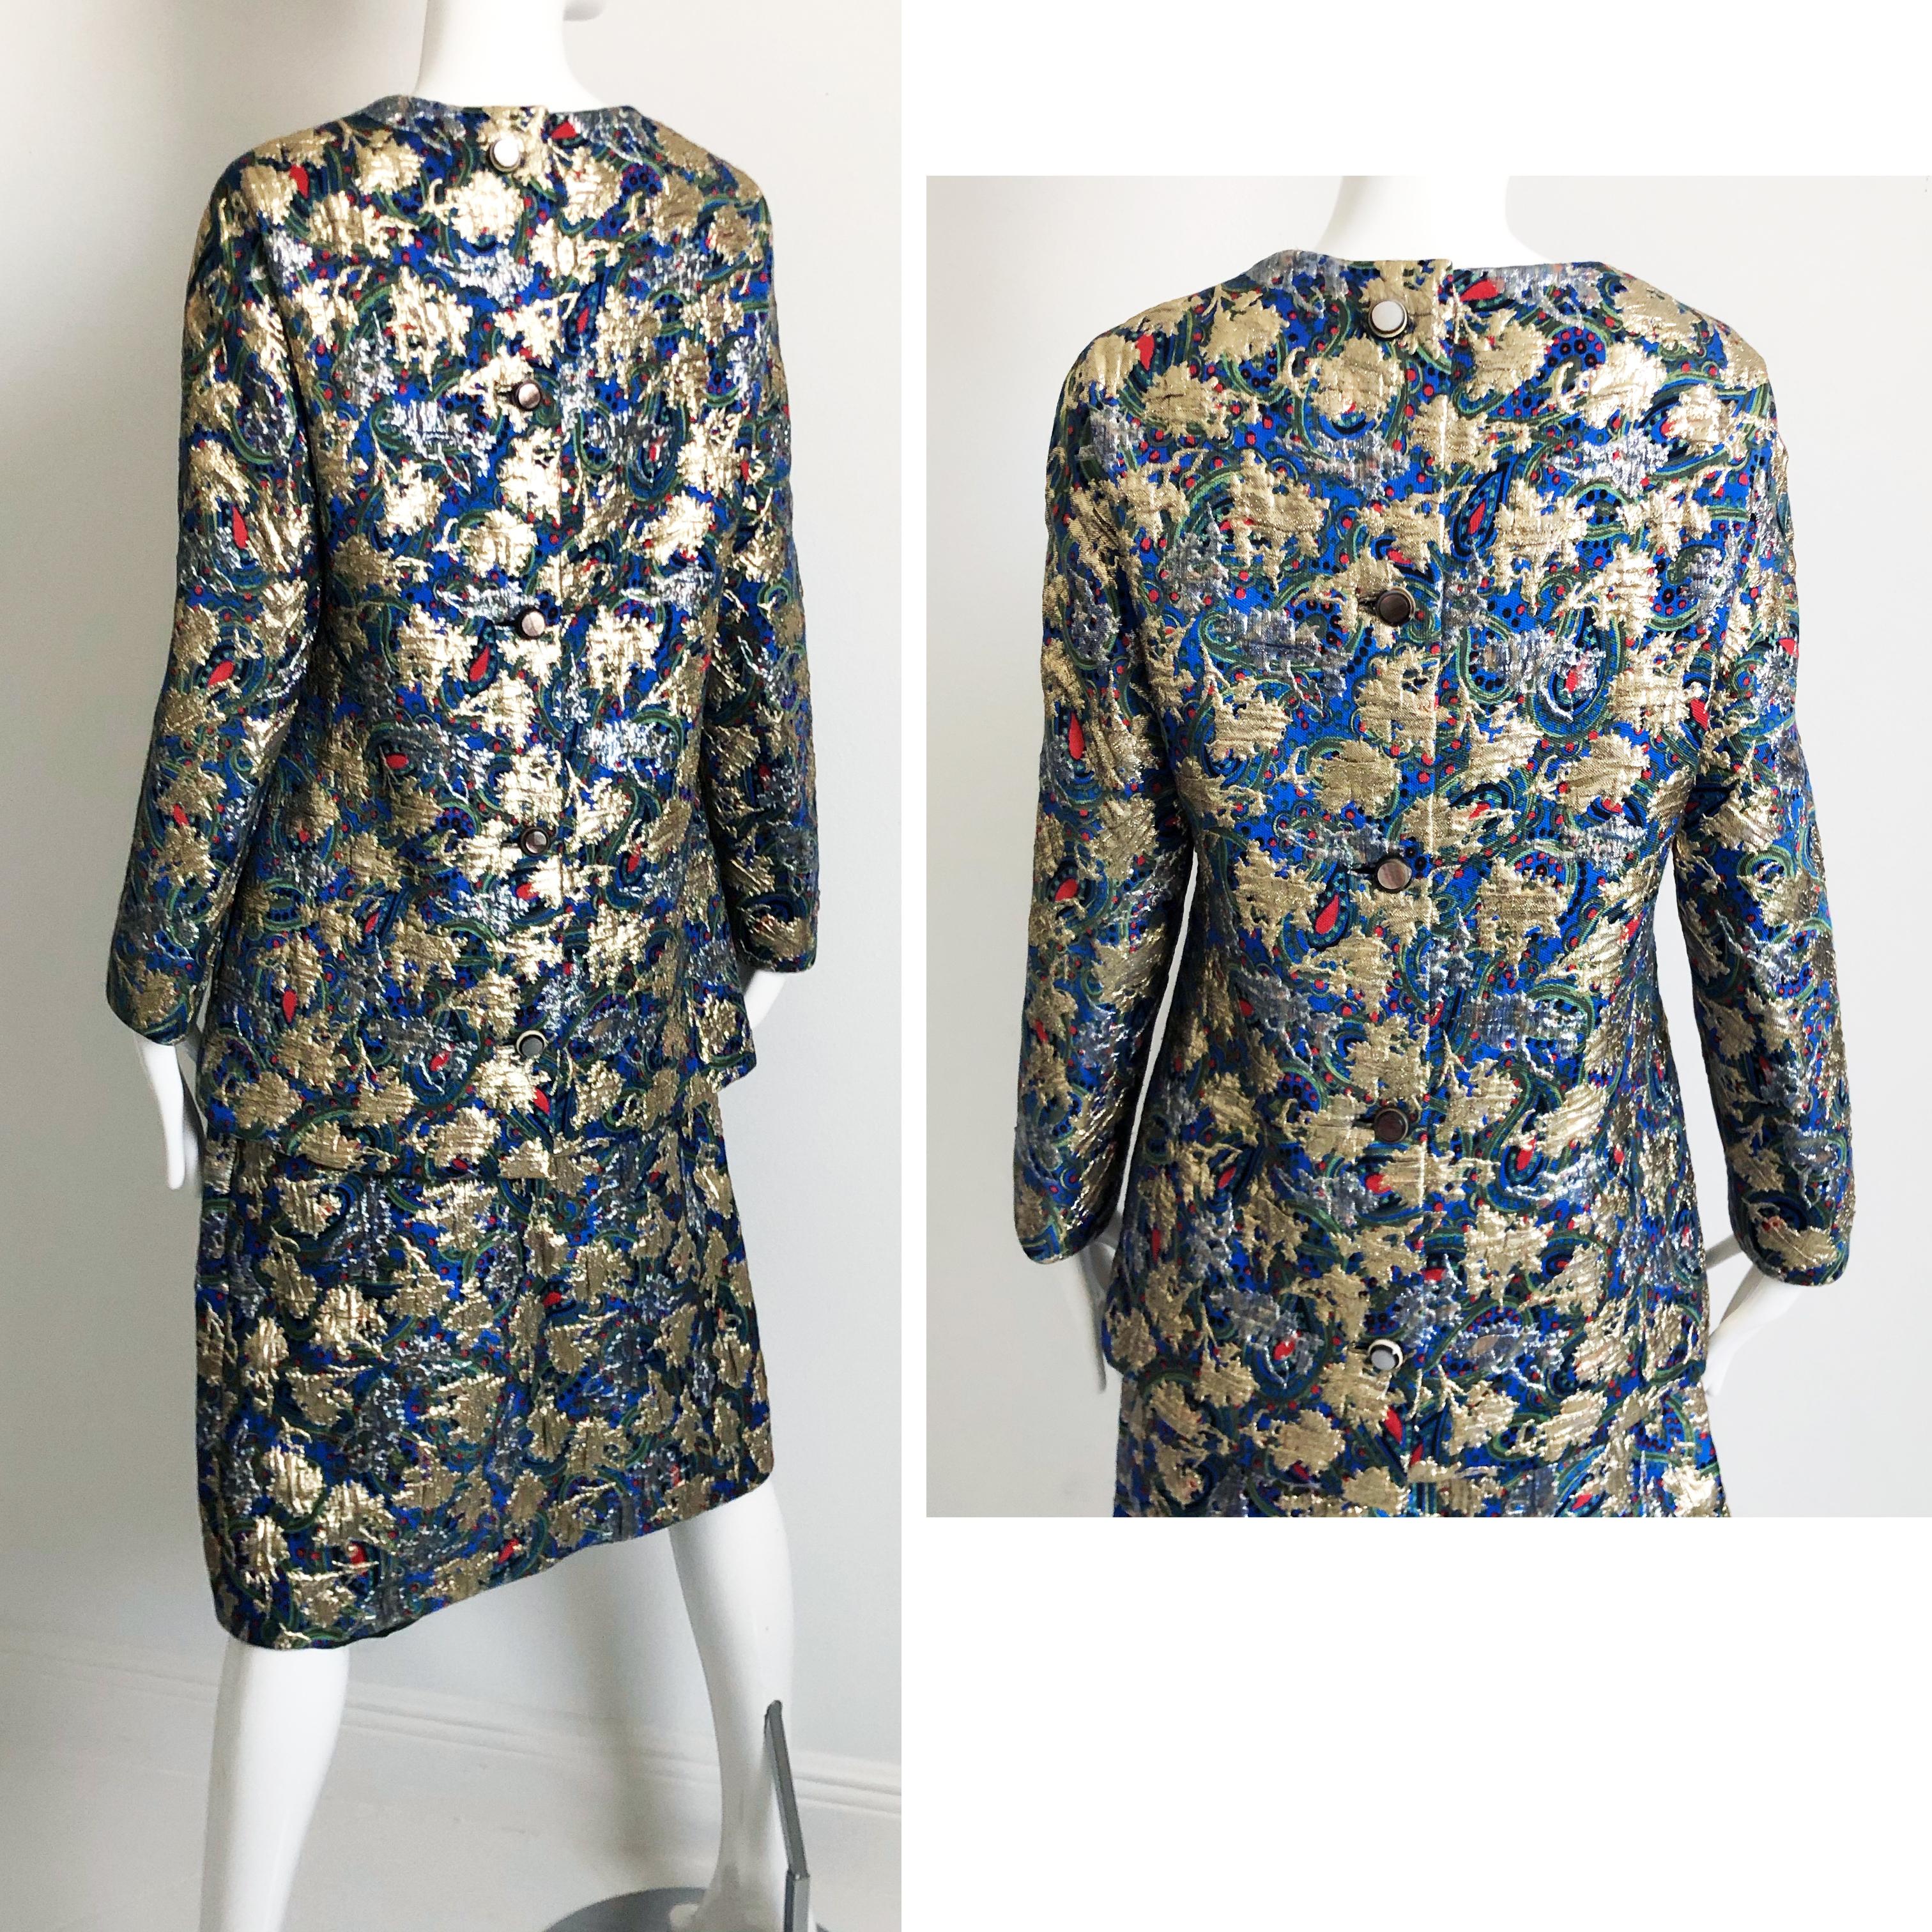 Galanos Metallic Brocade Suit 3pc Top, Long Vest and Skirt Vintage 60s Retro  For Sale 7